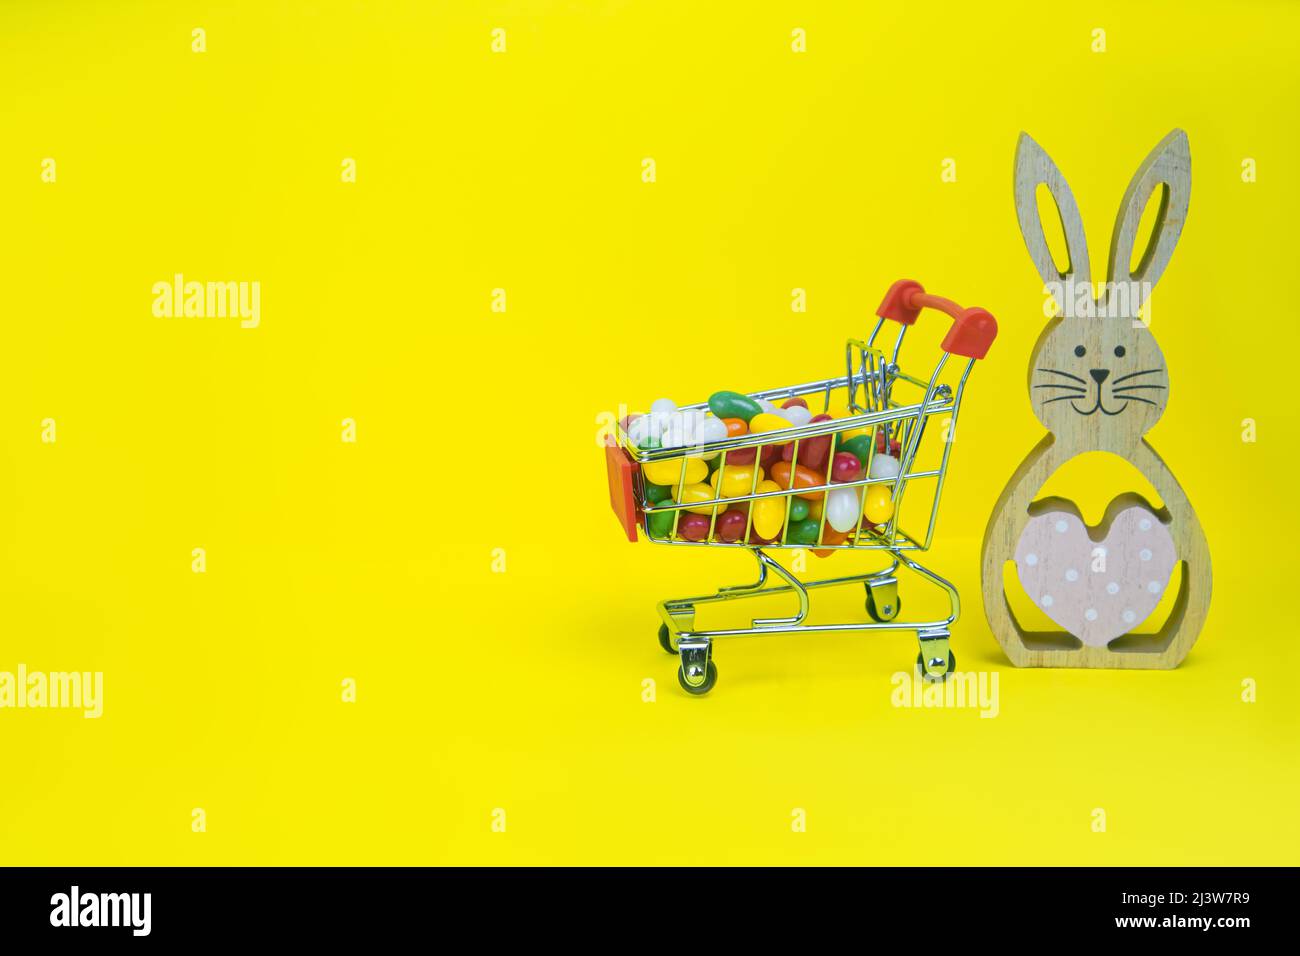 https://c8.alamy.com/comp/2J3W7R9/wooden-easter-bunny-and-shopping-cart-with-candies-on-yellow-background-2J3W7R9.jpg